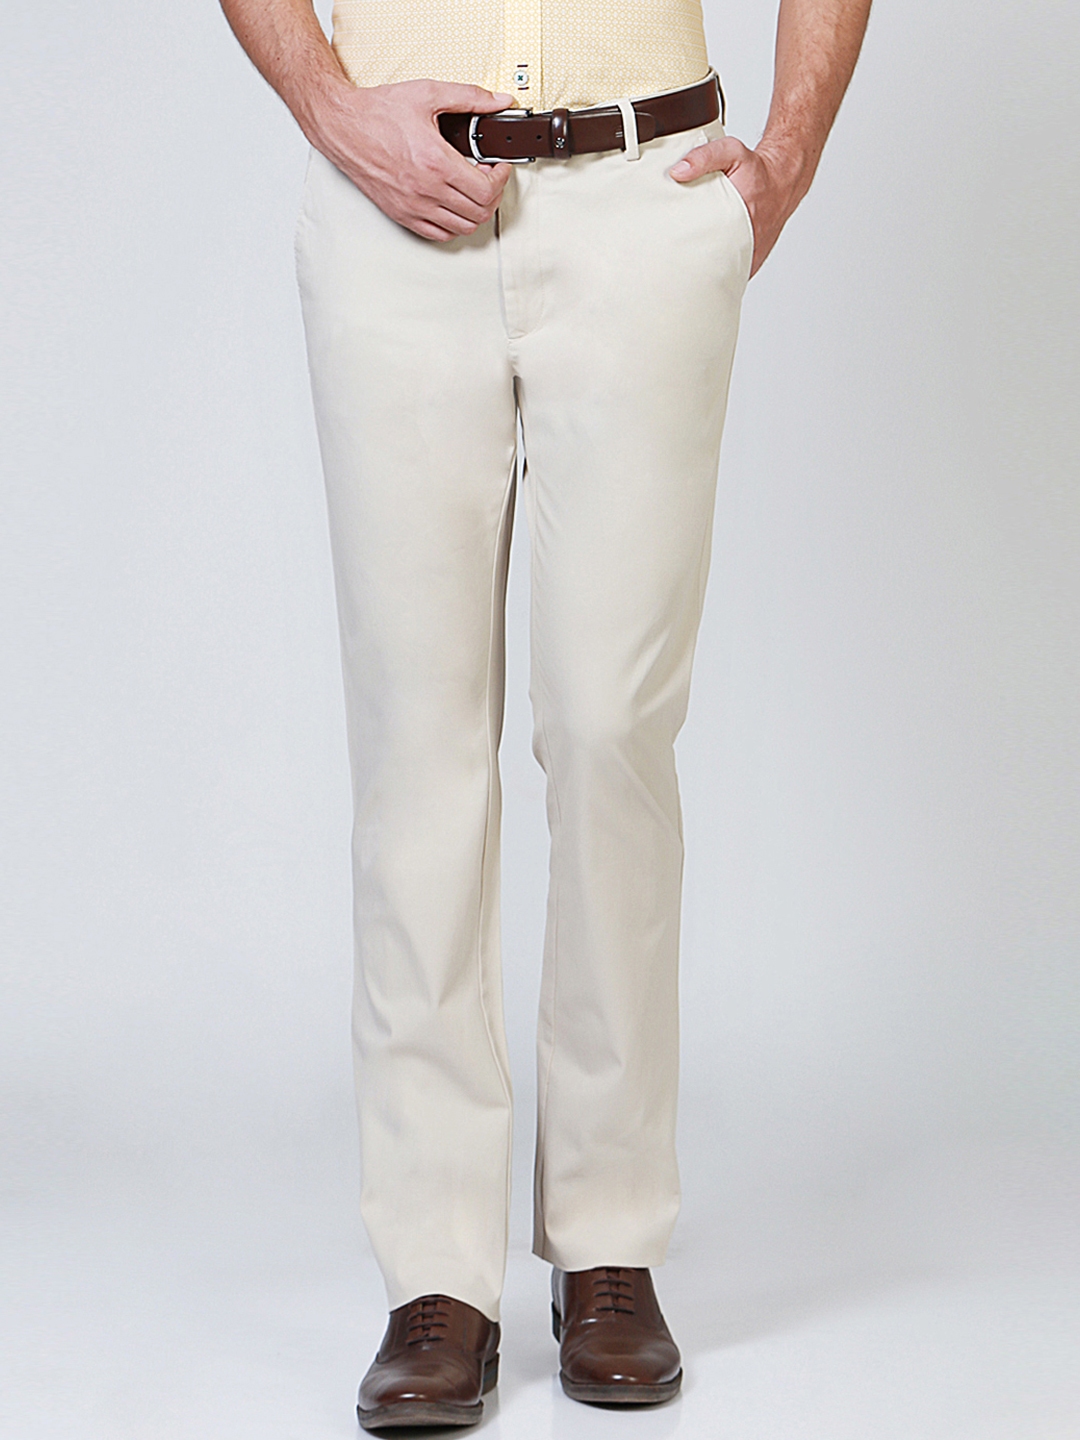 Allen Solly White Trousers Buy Allen Solly White Trousers Online at Best  Price in India  NykaaMan